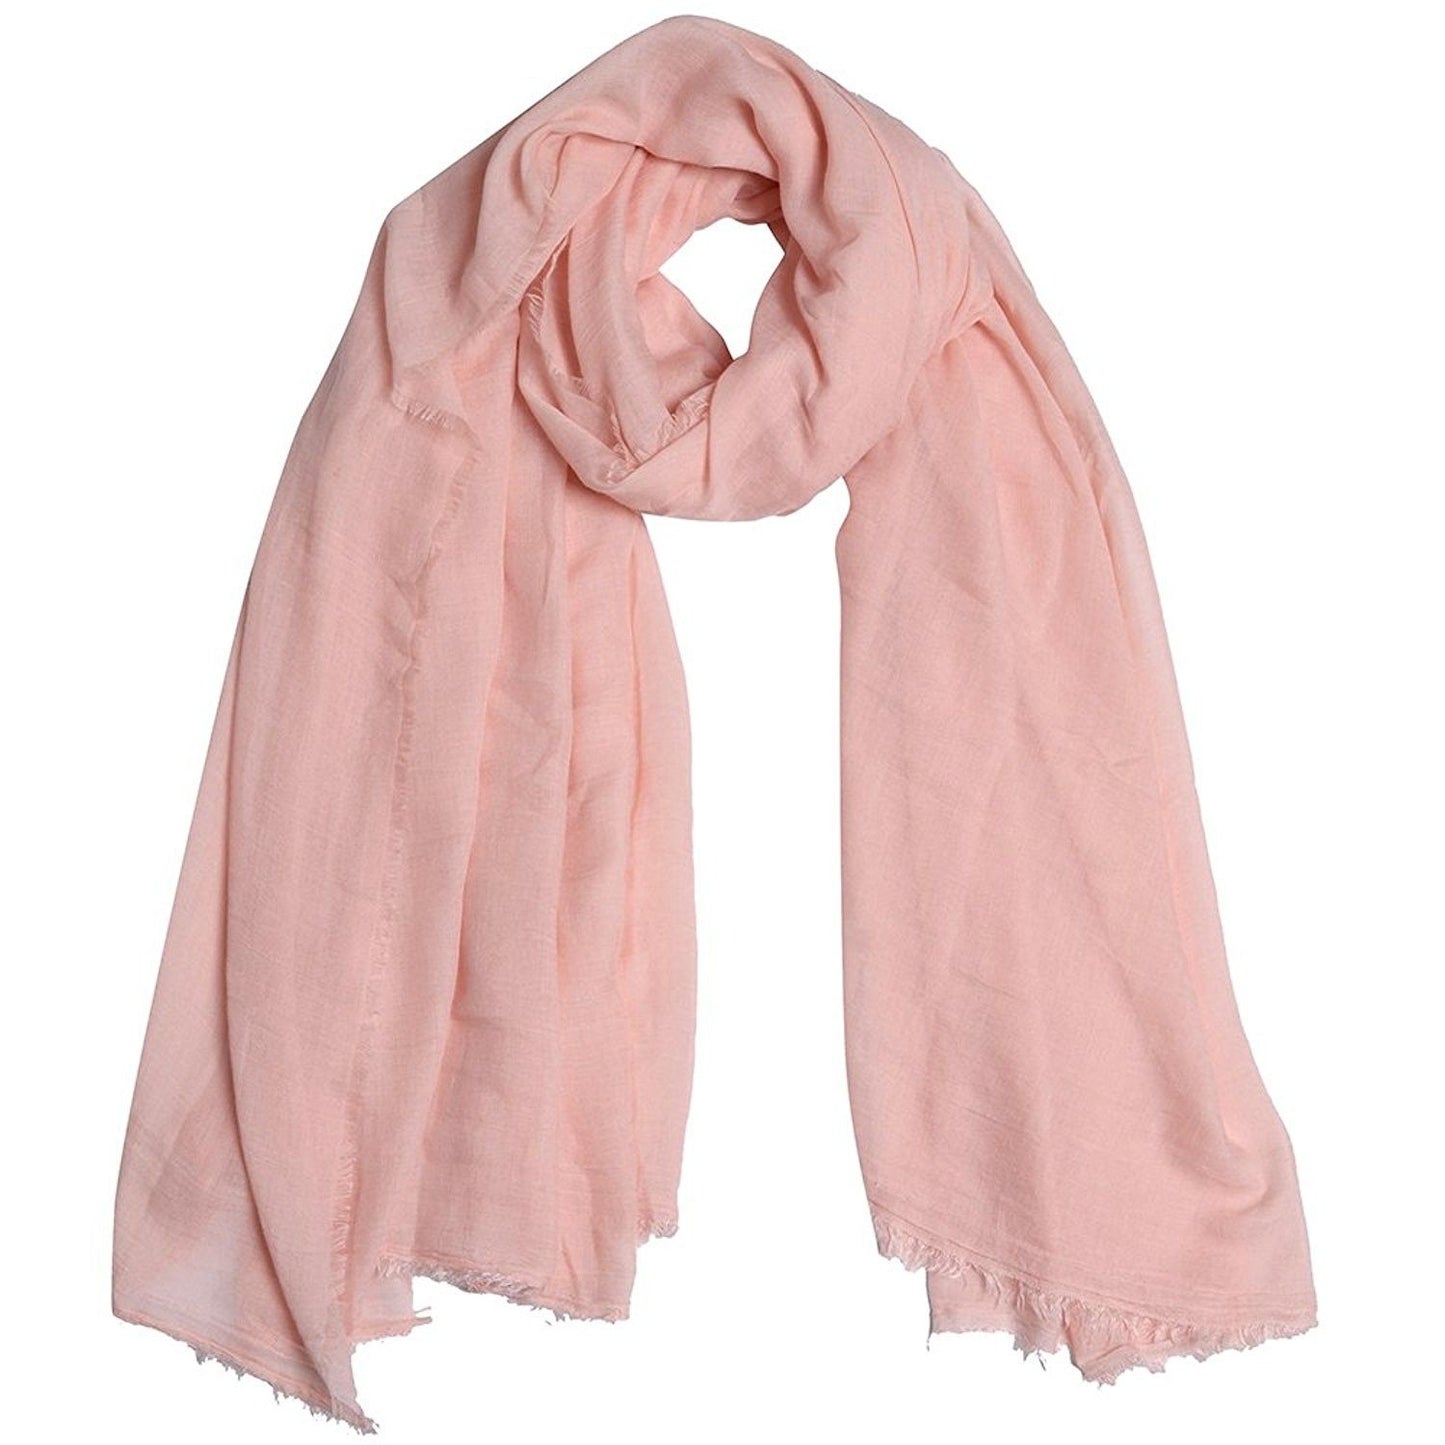 Cotton Crinkle Hijab - Baby Pink - Mawdeest 